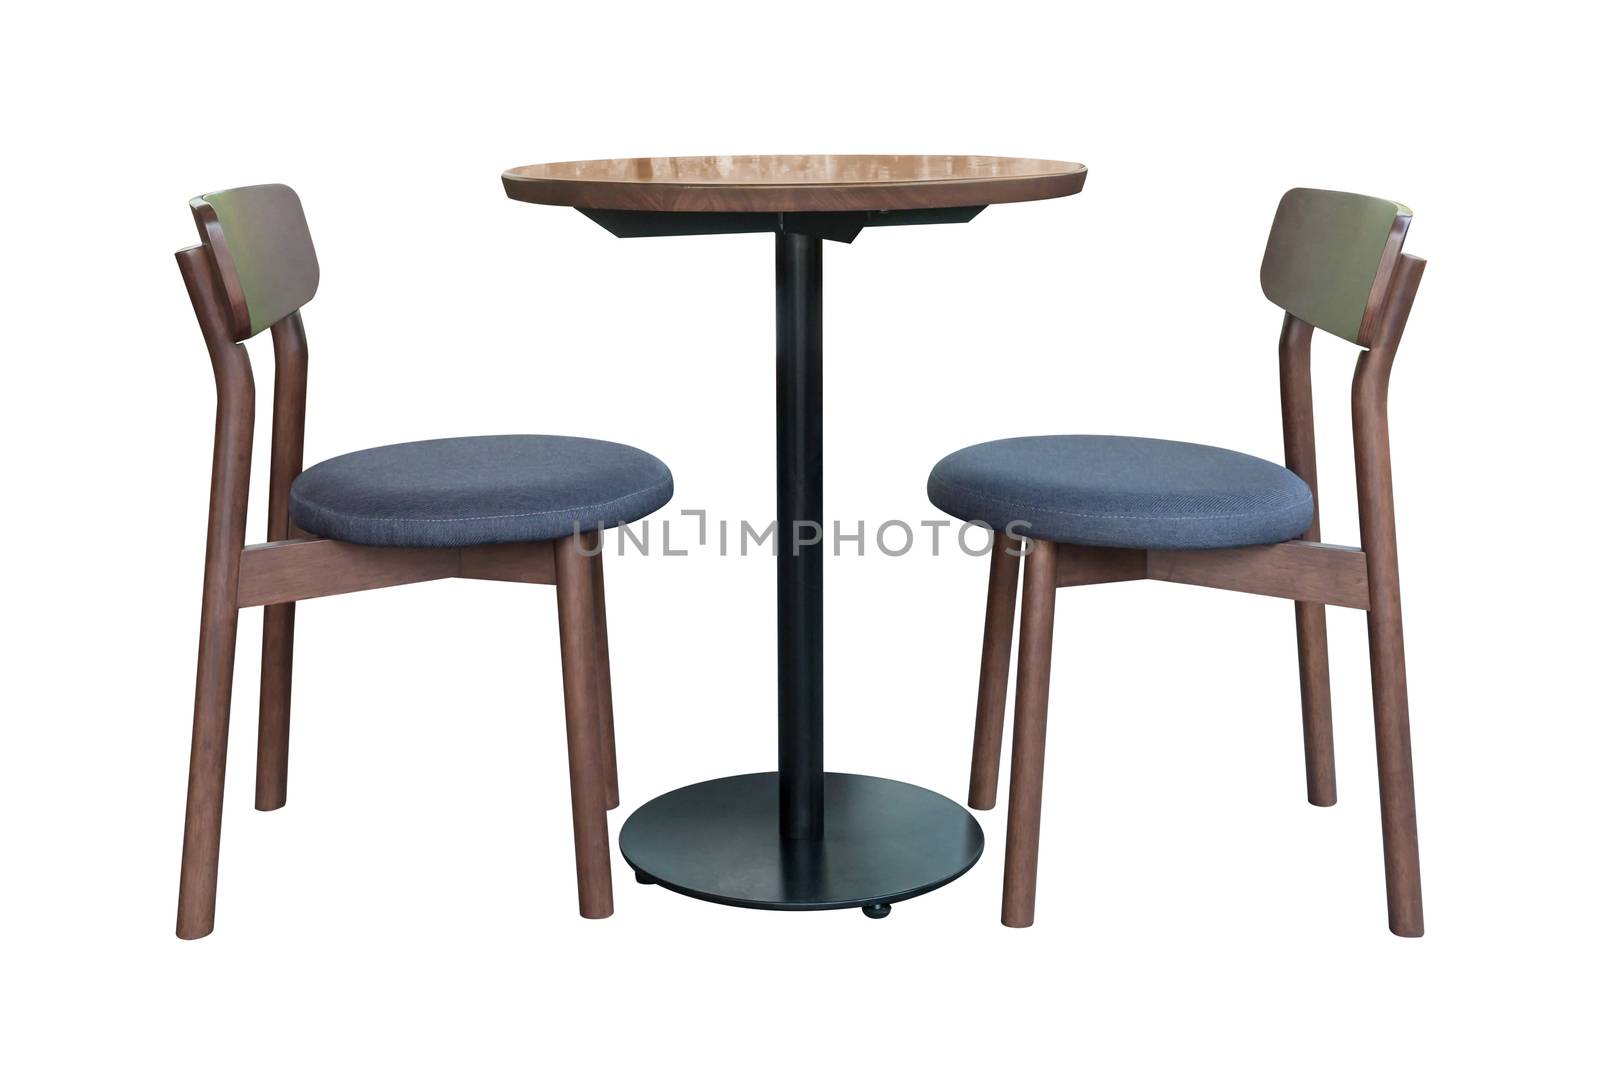 Modern table with steel leg and chair with  fabric cushion isolated on white background, work with clipping path.